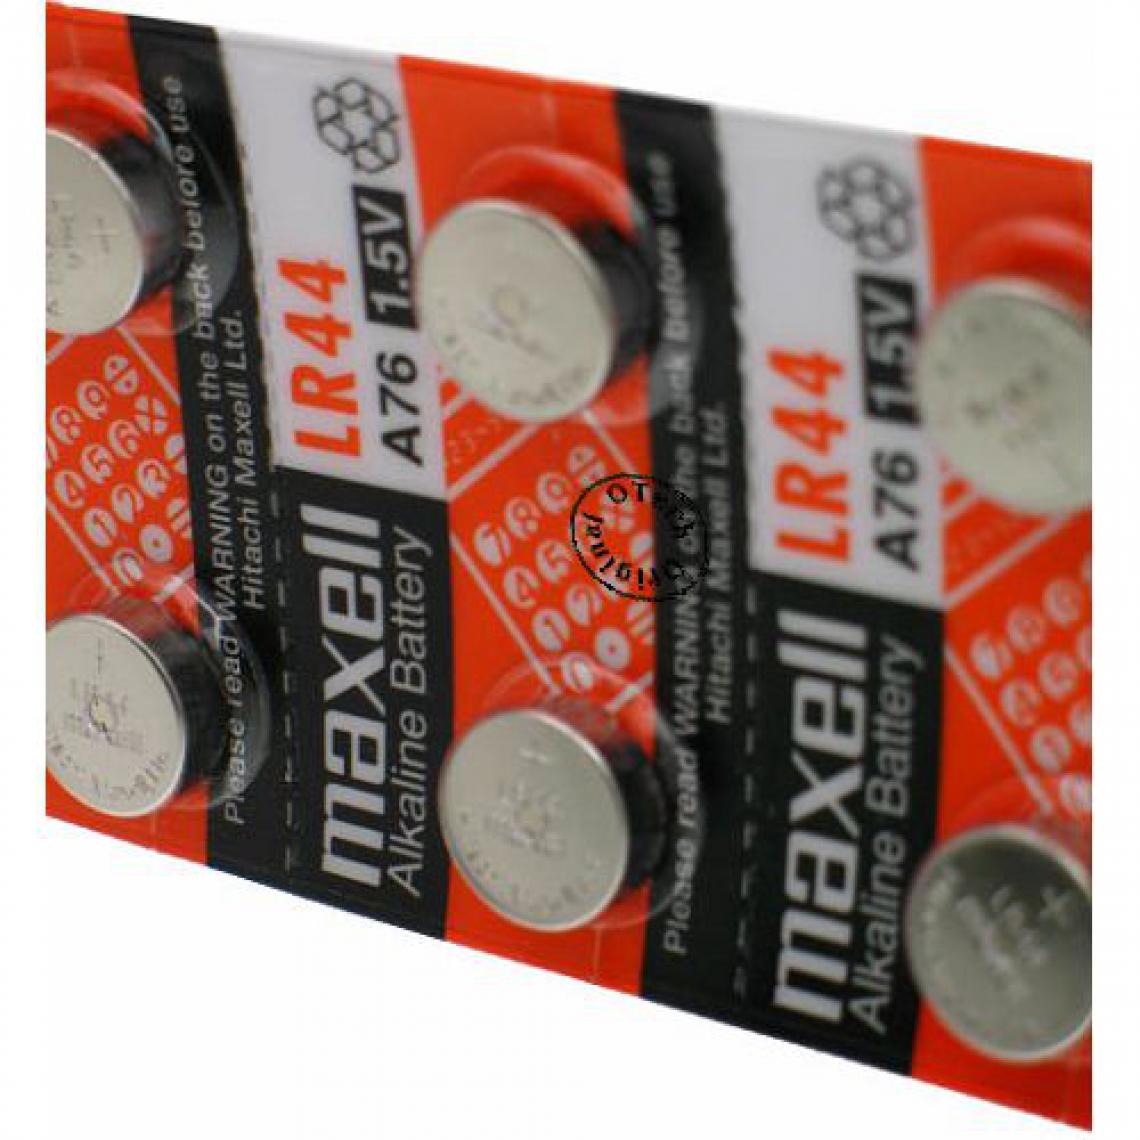 Otech - Pack de 10 piles maxell pour MAXELL AG13 - Piles rechargeables